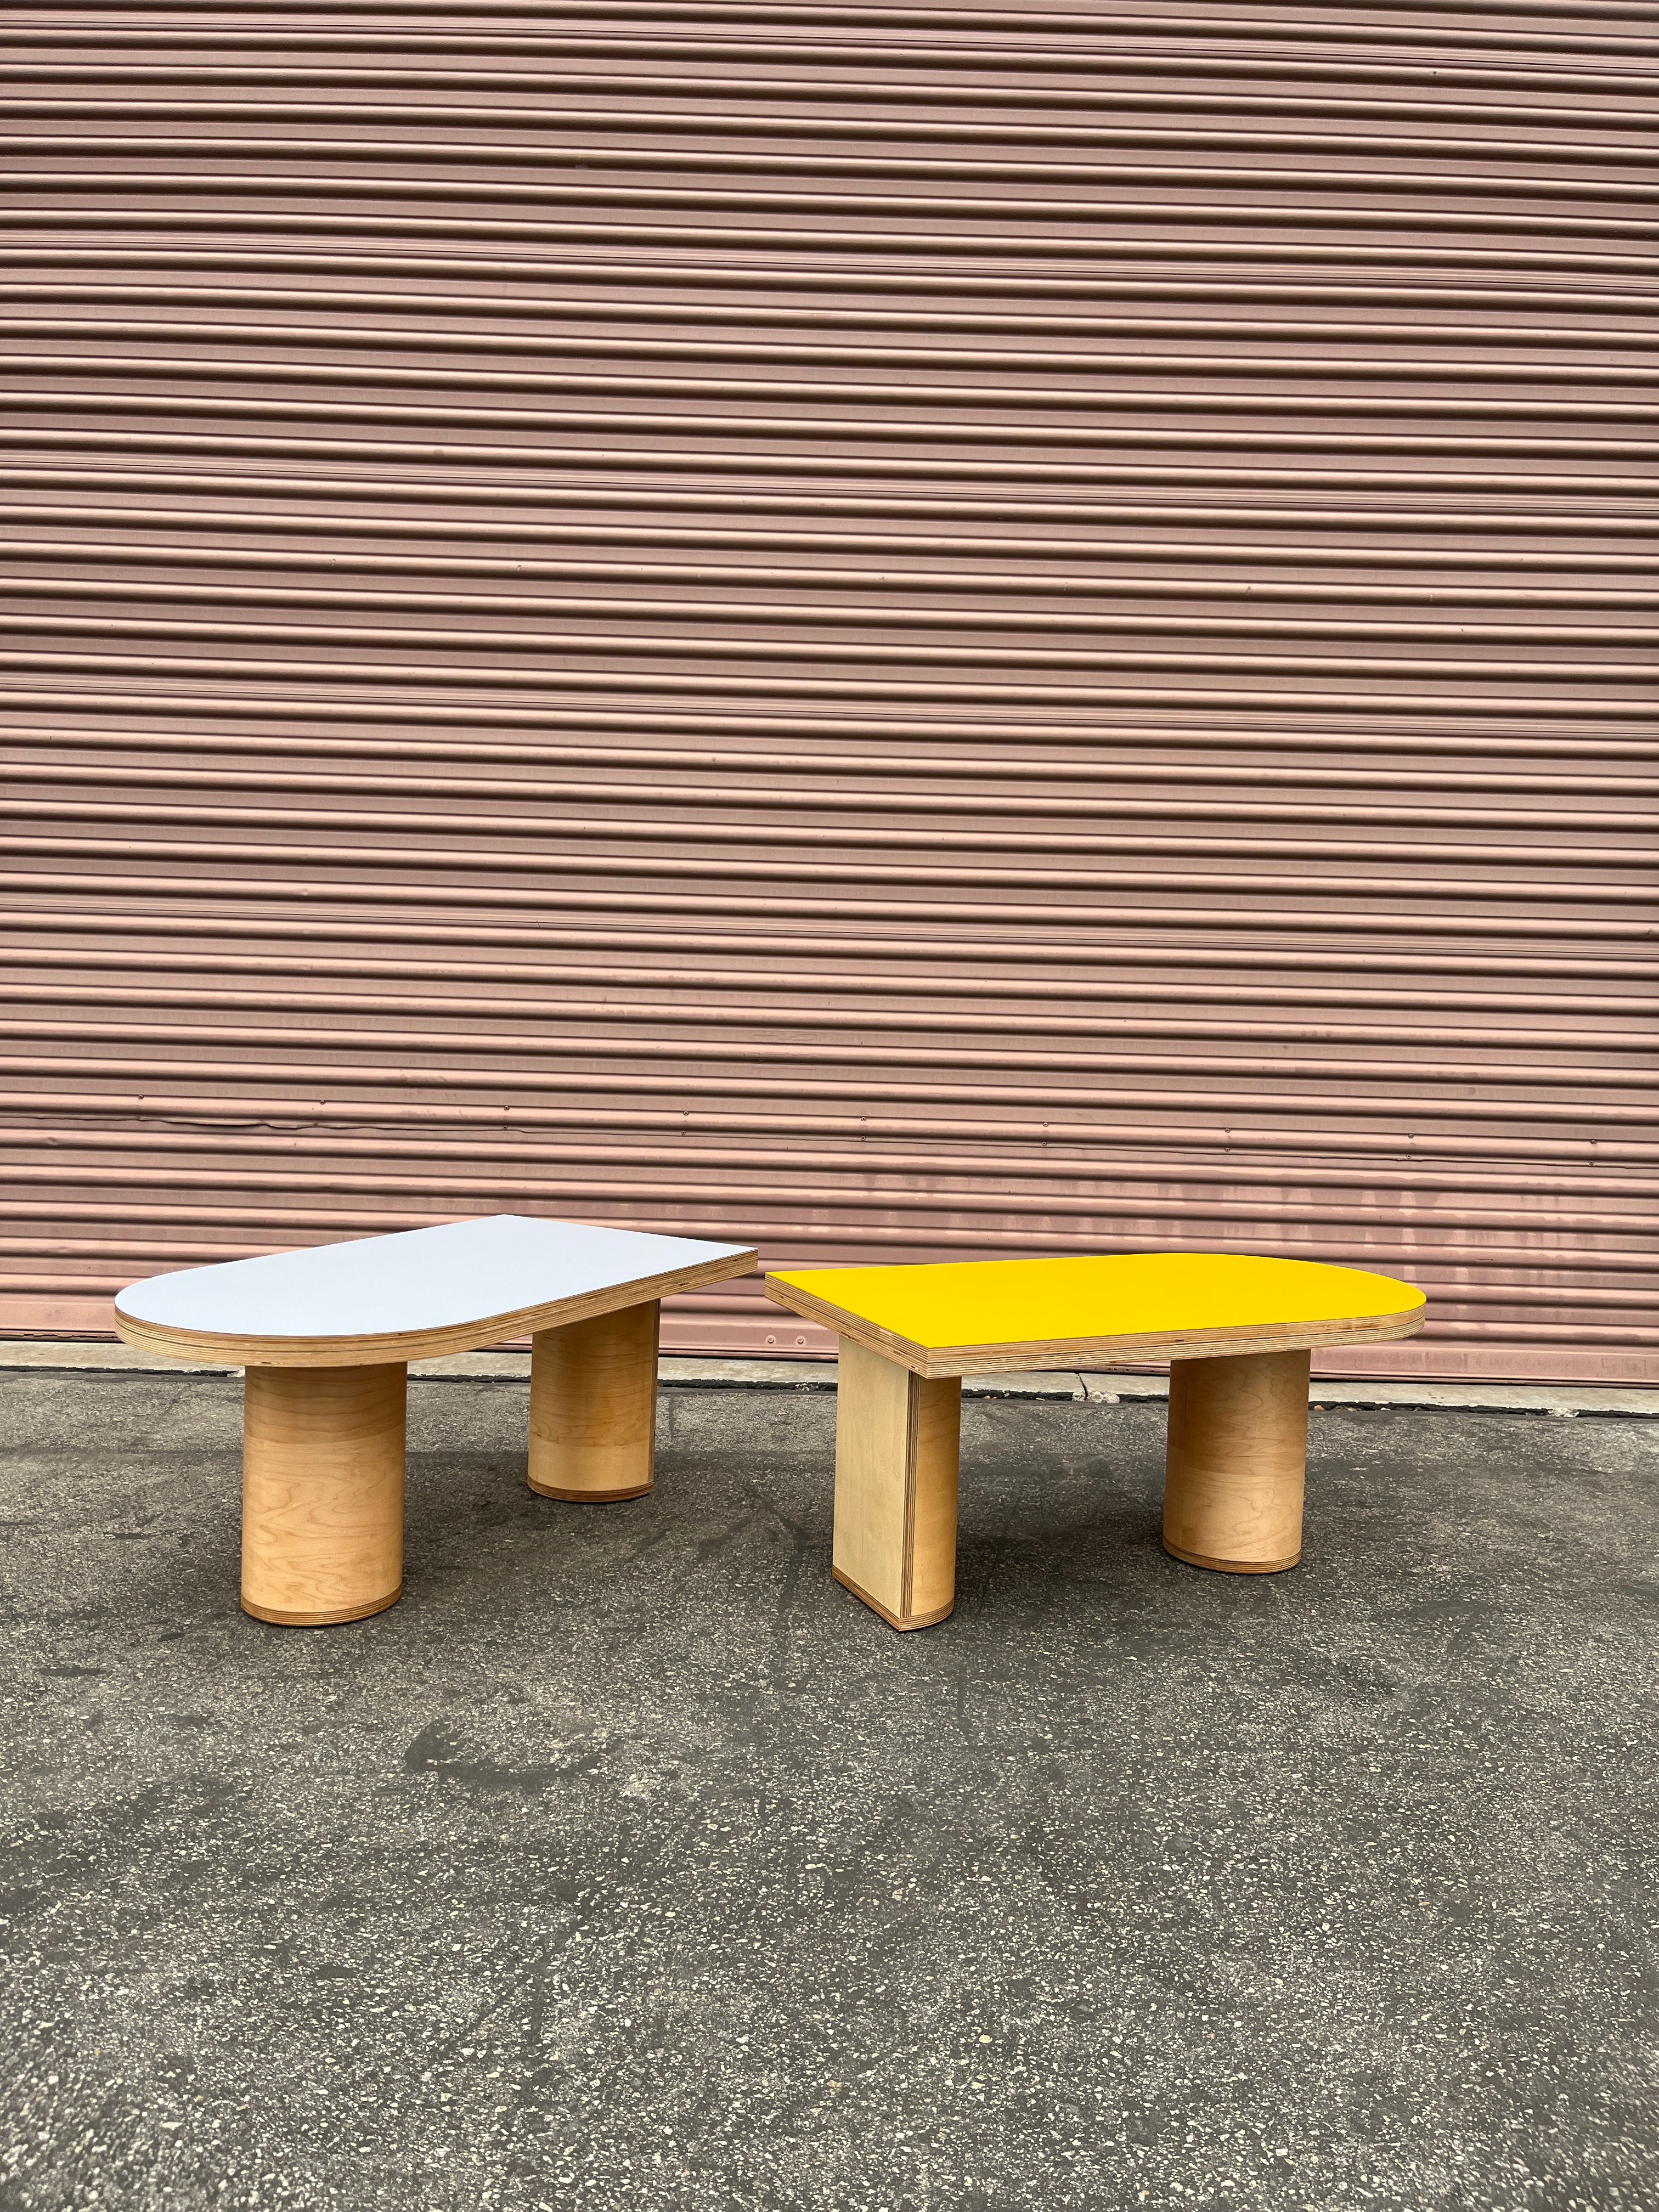  Community Coffee Table Set product image 5